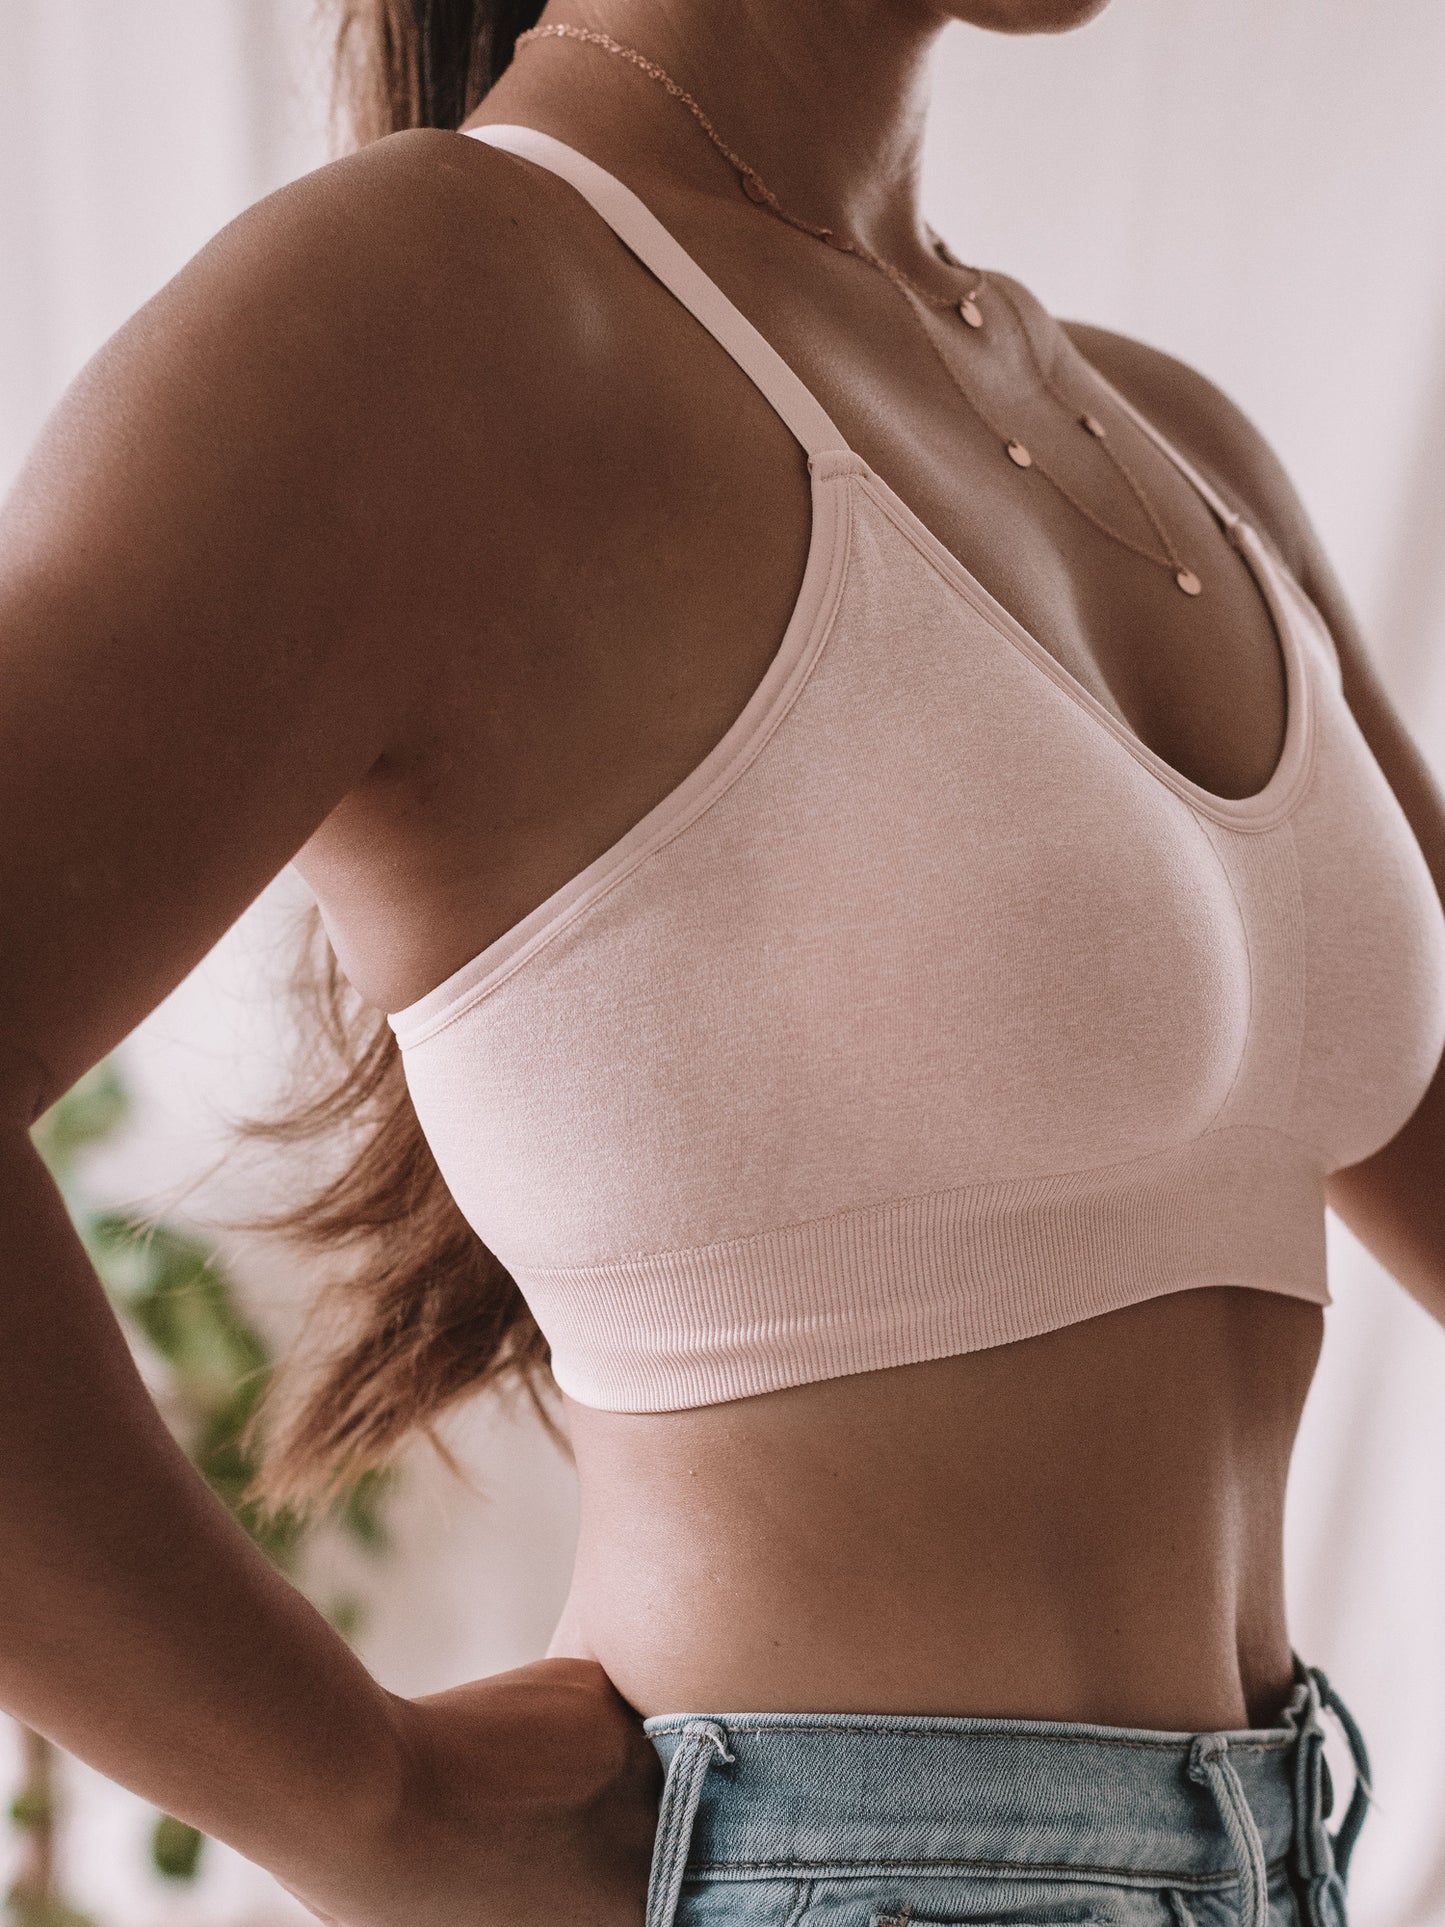 The original CSB classic, this sports bra is a crowd-favourite for